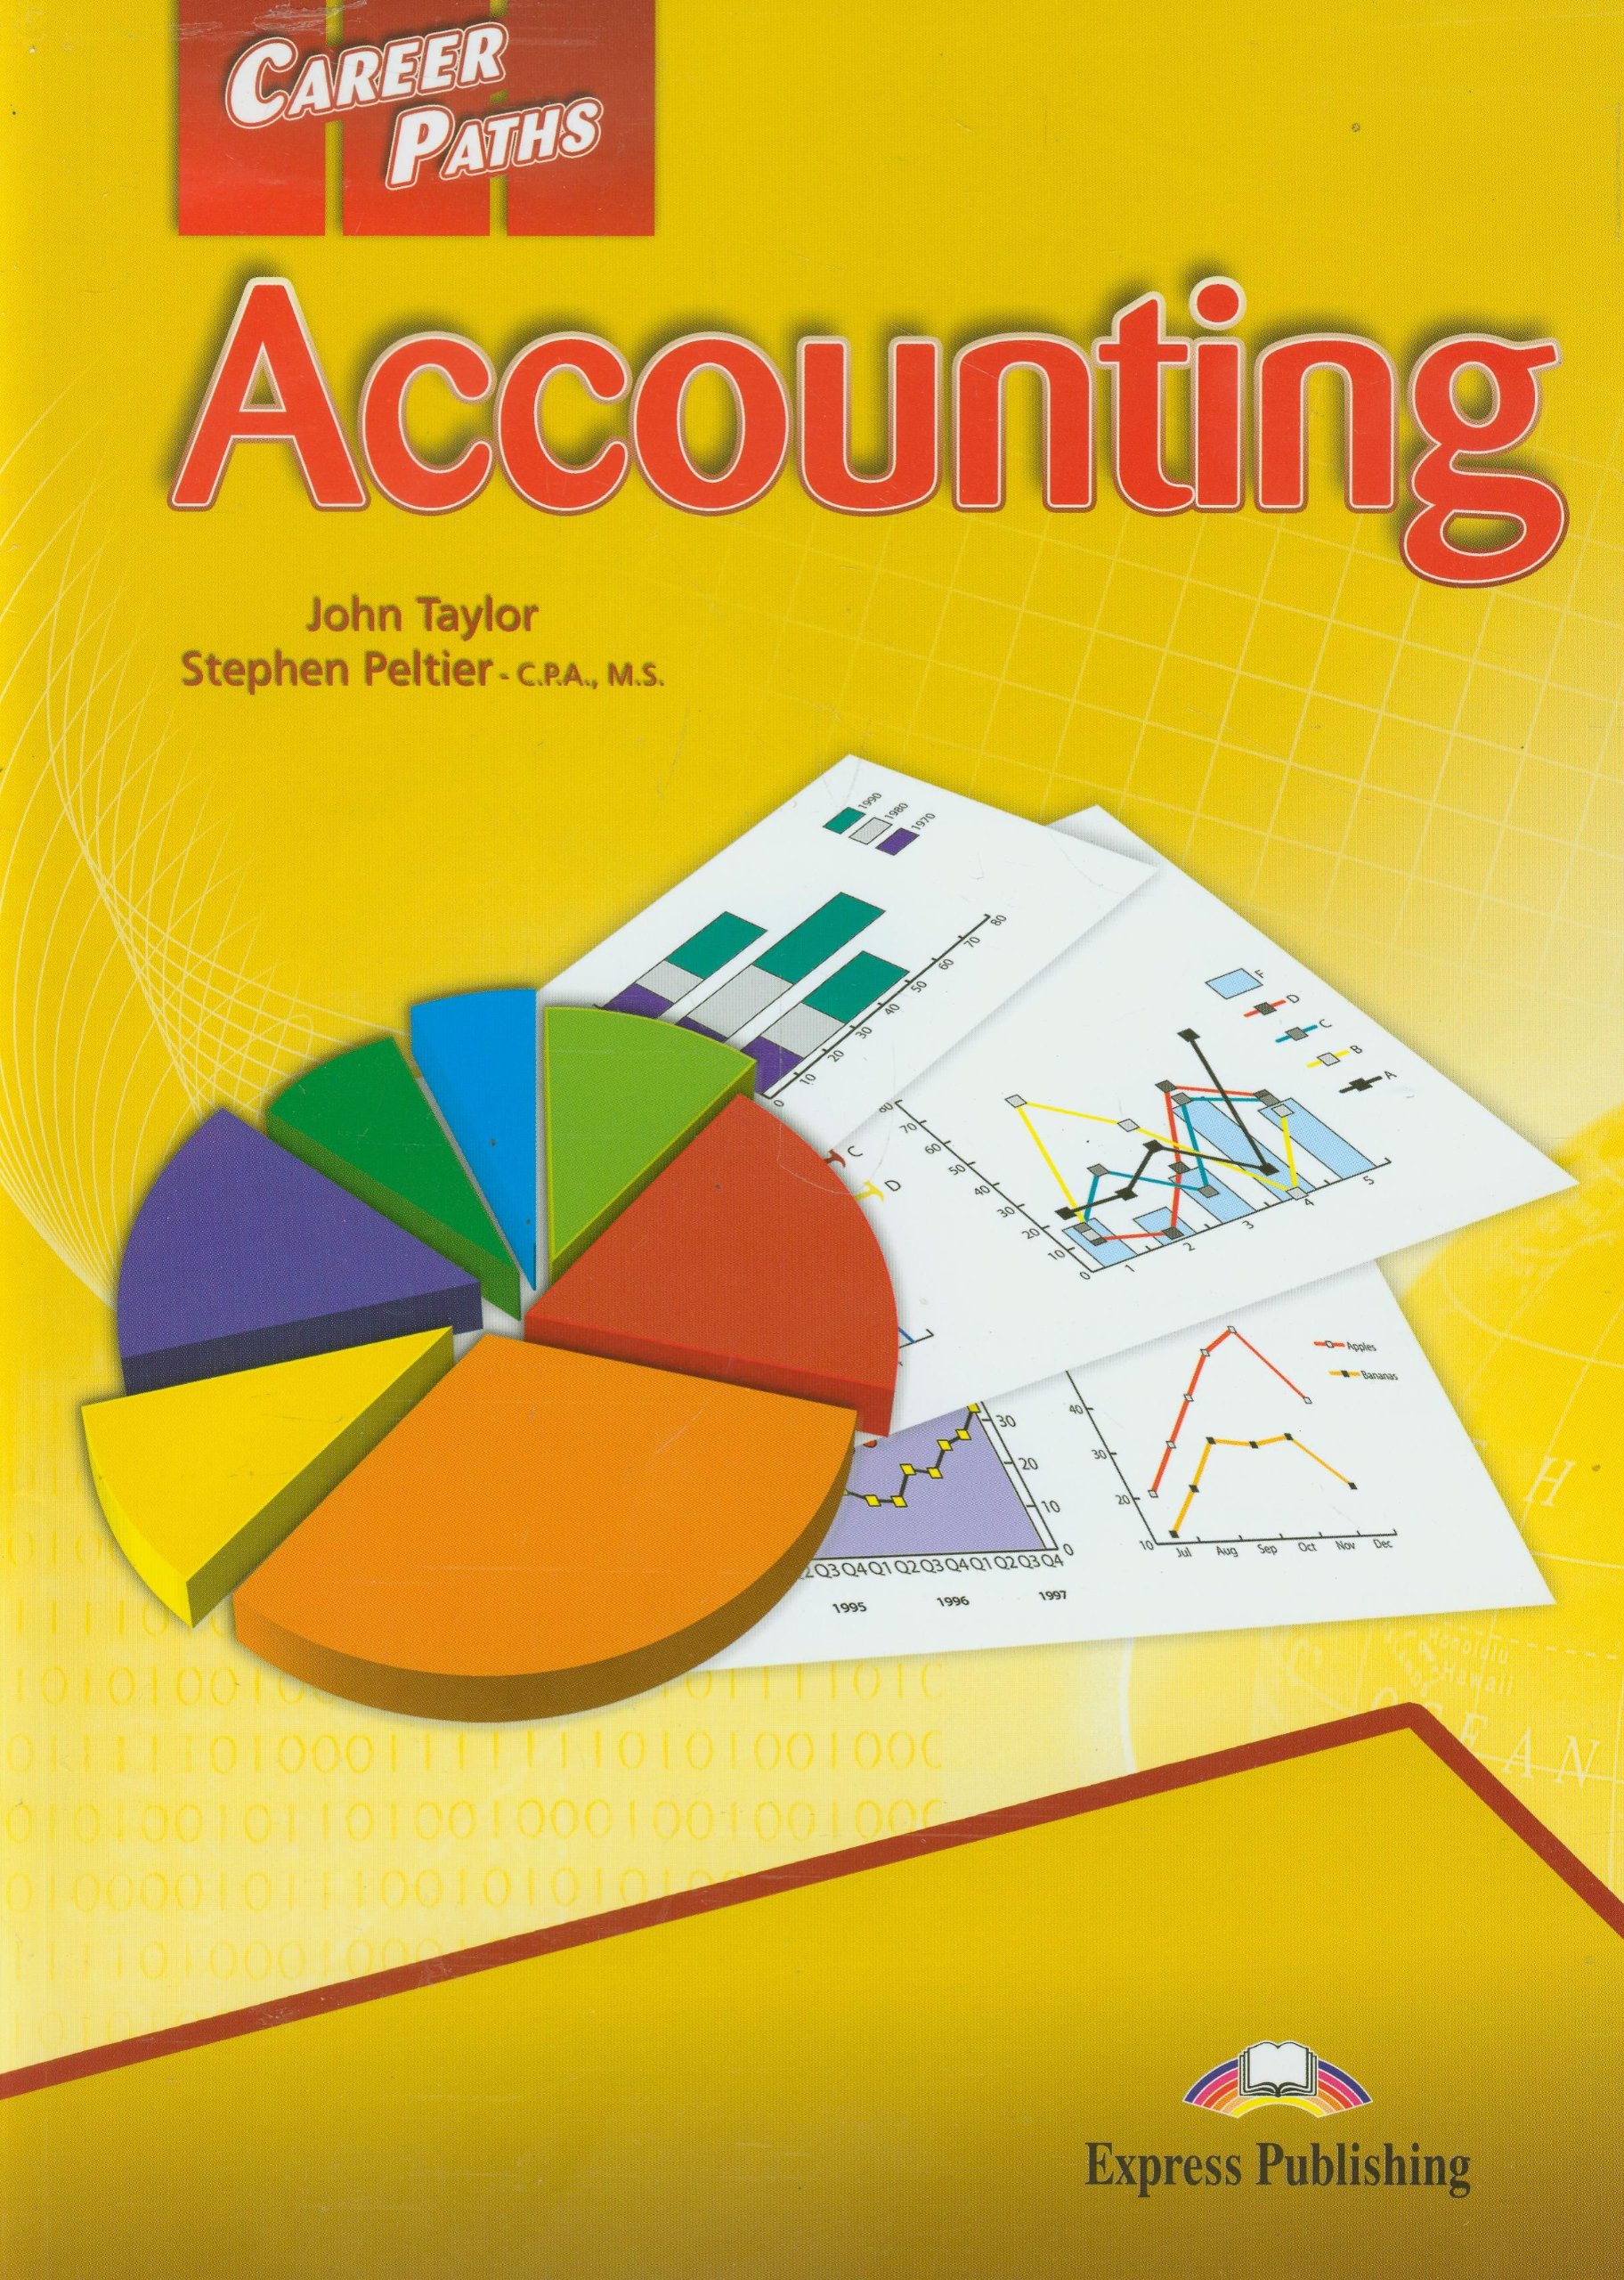 ACCOUNTING (CAREER PATHS) Student's Book